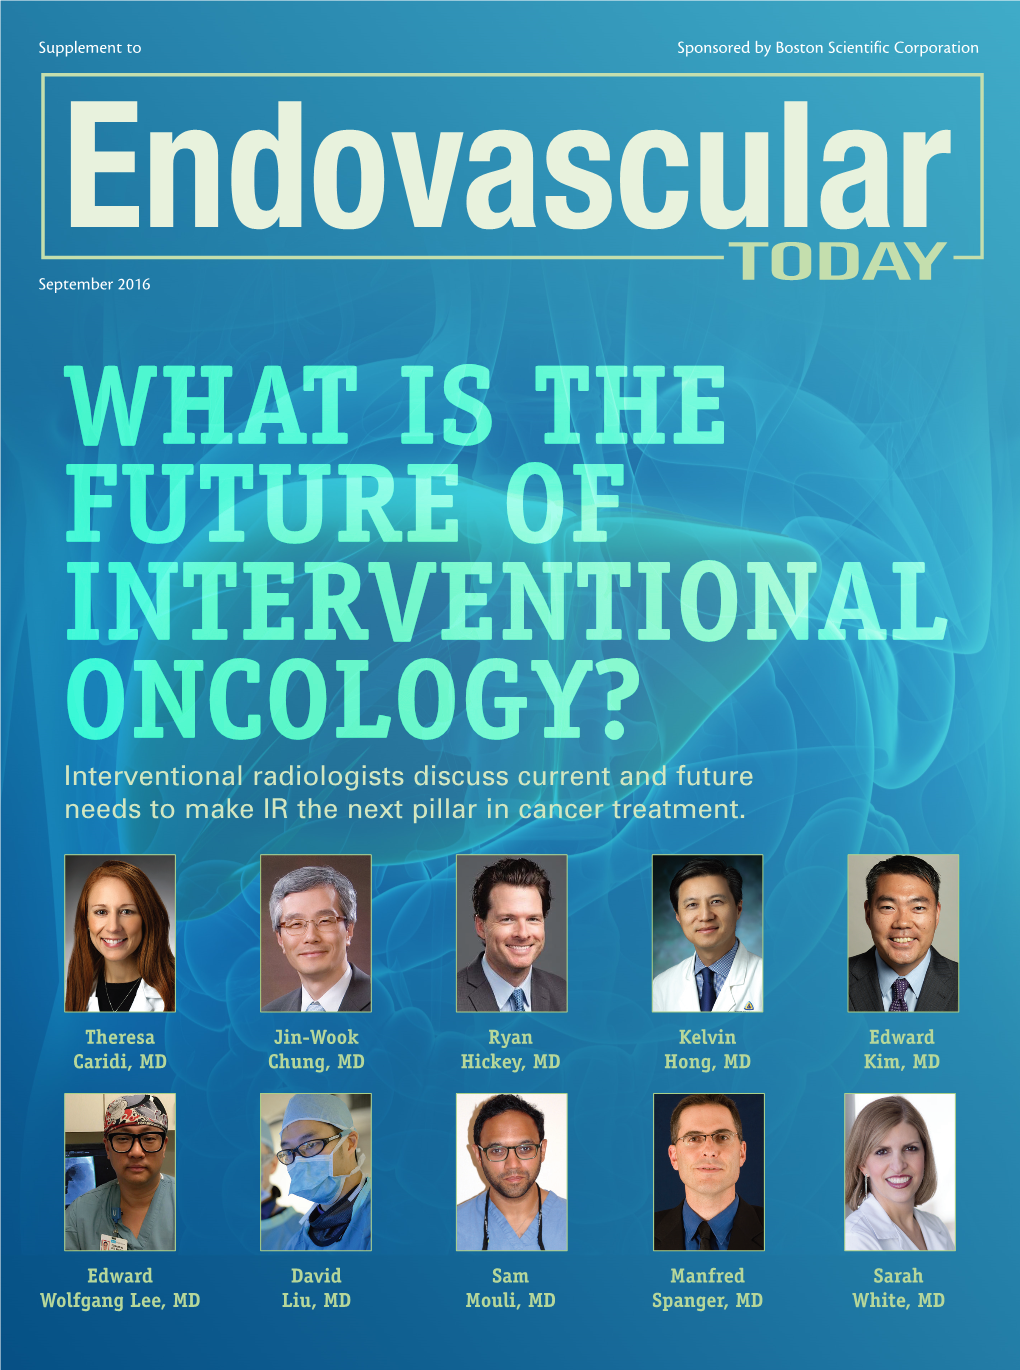 WHAT IS the FUTURE of INTERVENTIONAL ONCOLOGY? Interventional Radiologists Discuss Current and Future Needs to Make IR the Next Pillar in Cancer Treatment